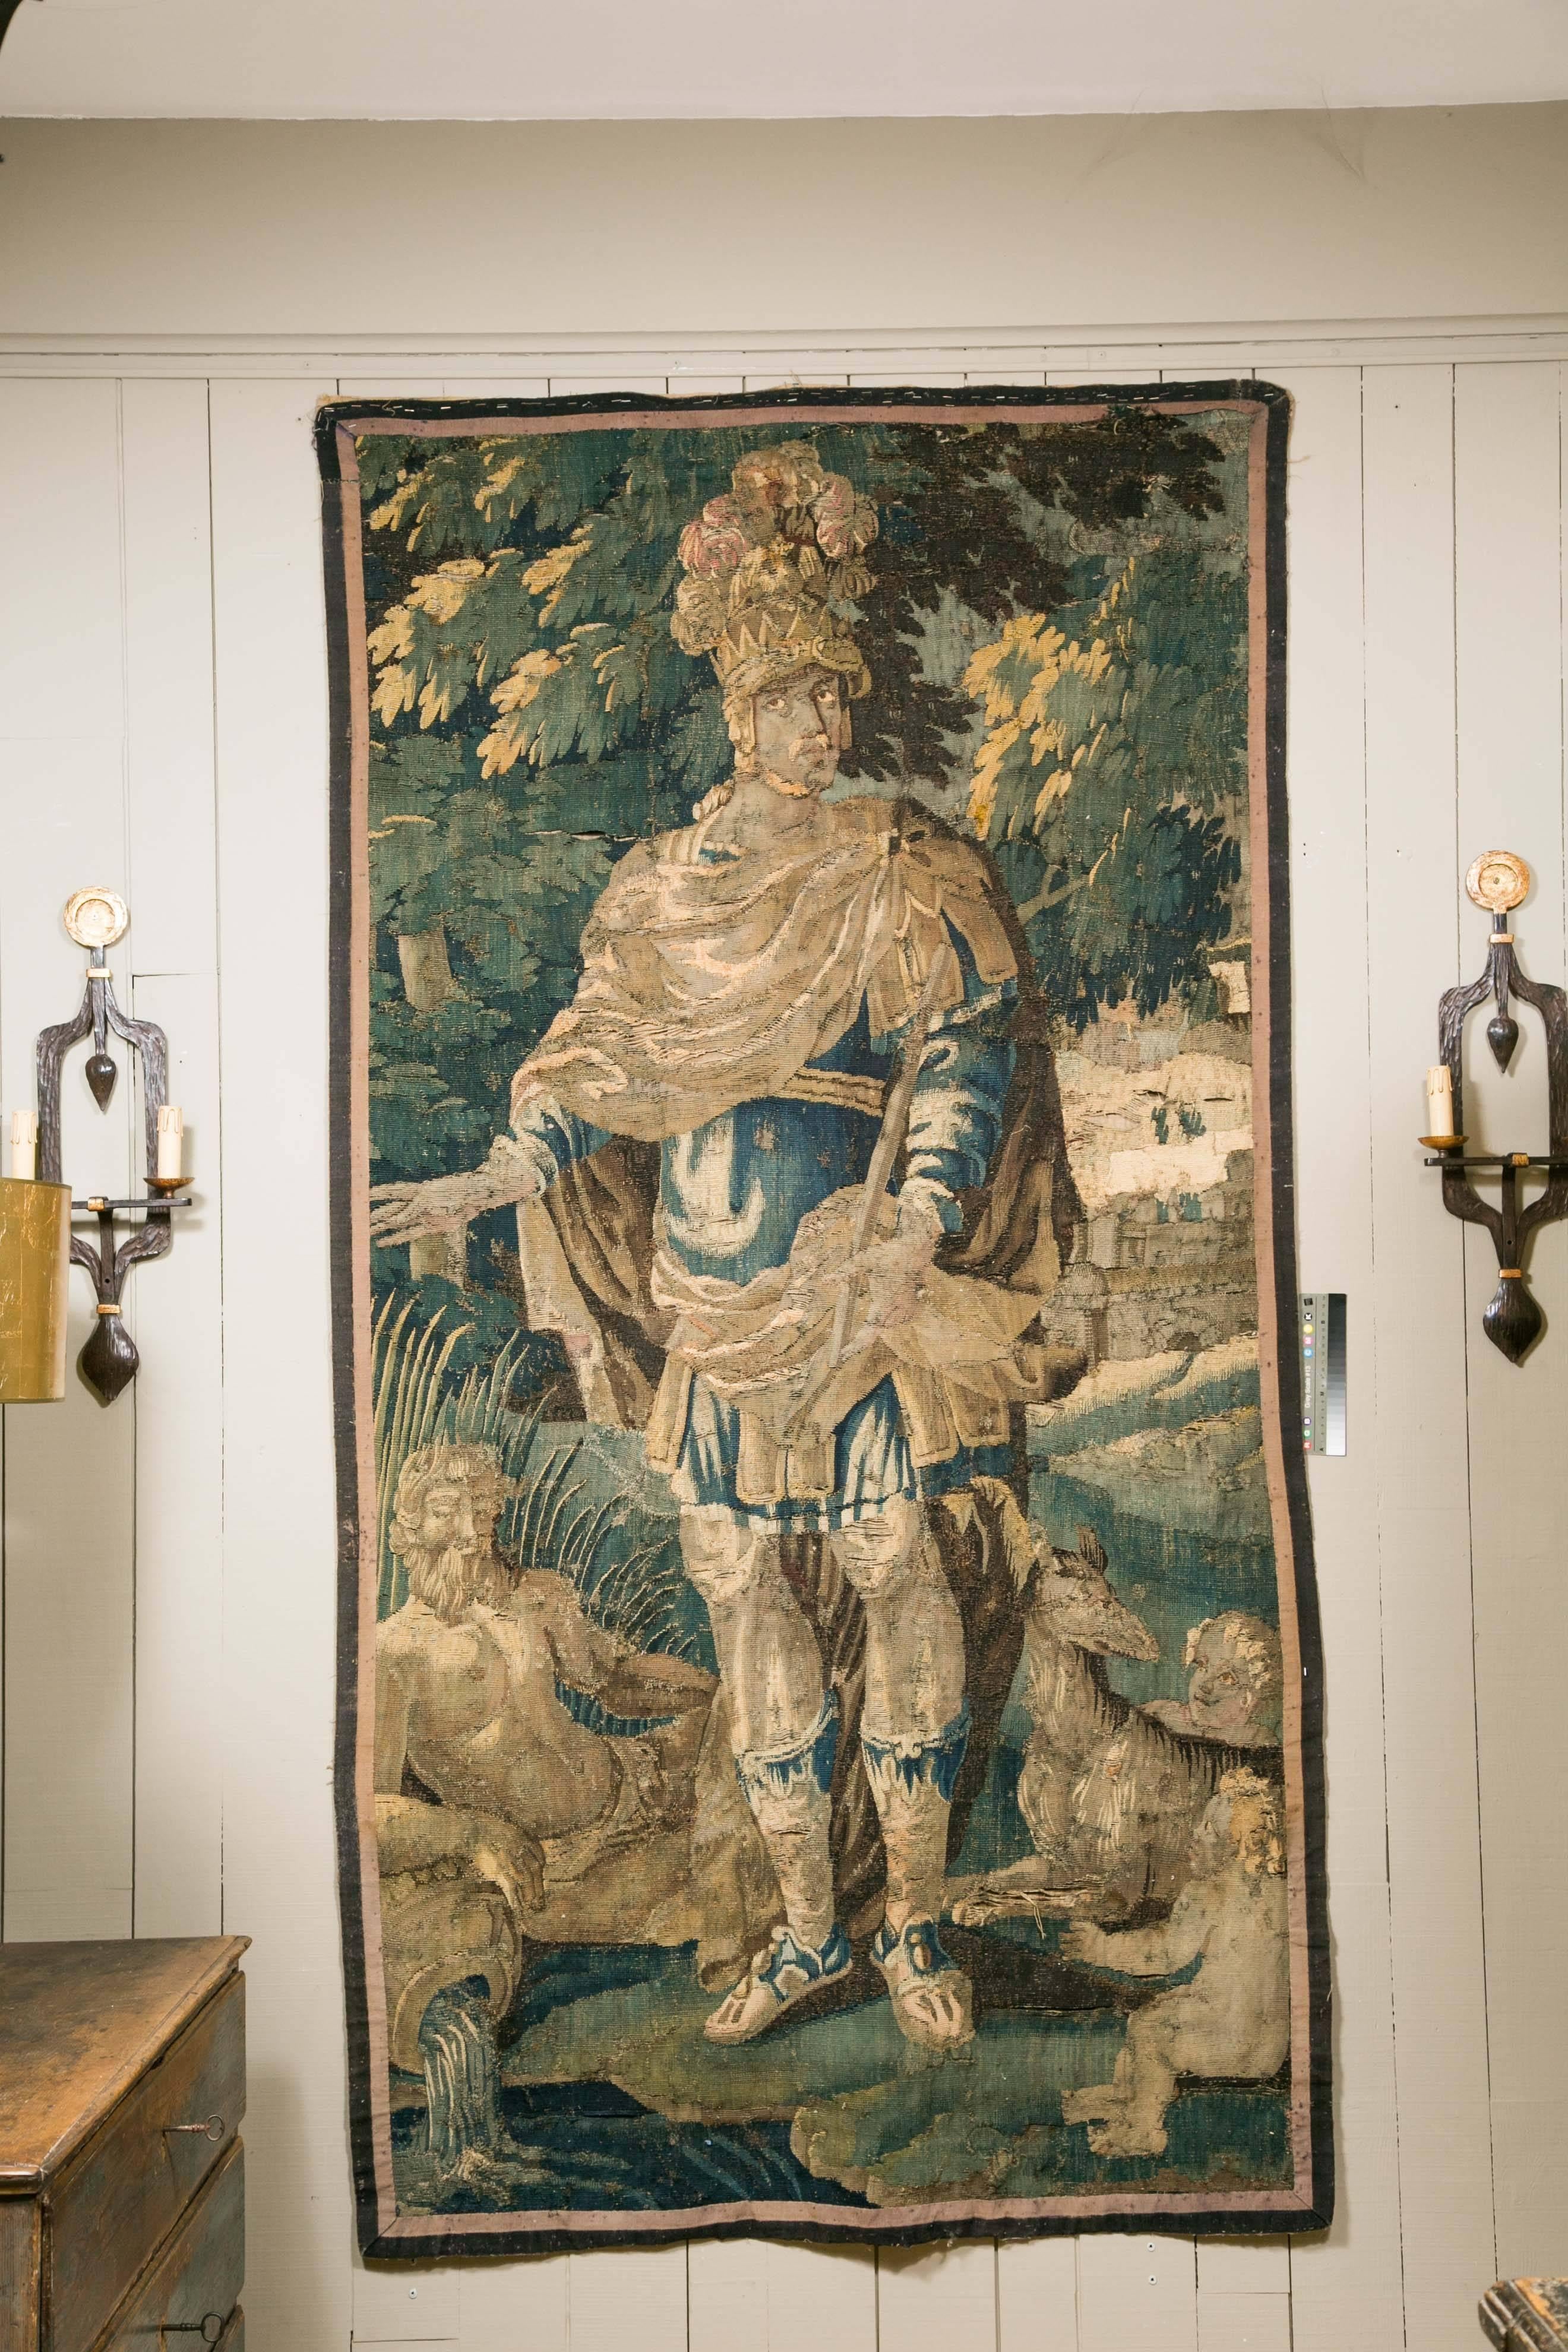 An early 18th century (possibly late 17th) vertical flemish tapestry.

Polychrome scene depicting a dressed knight in a forest scenery with the mythology's figure of Neptune in the bottom part.

Very good condition. Unframed.